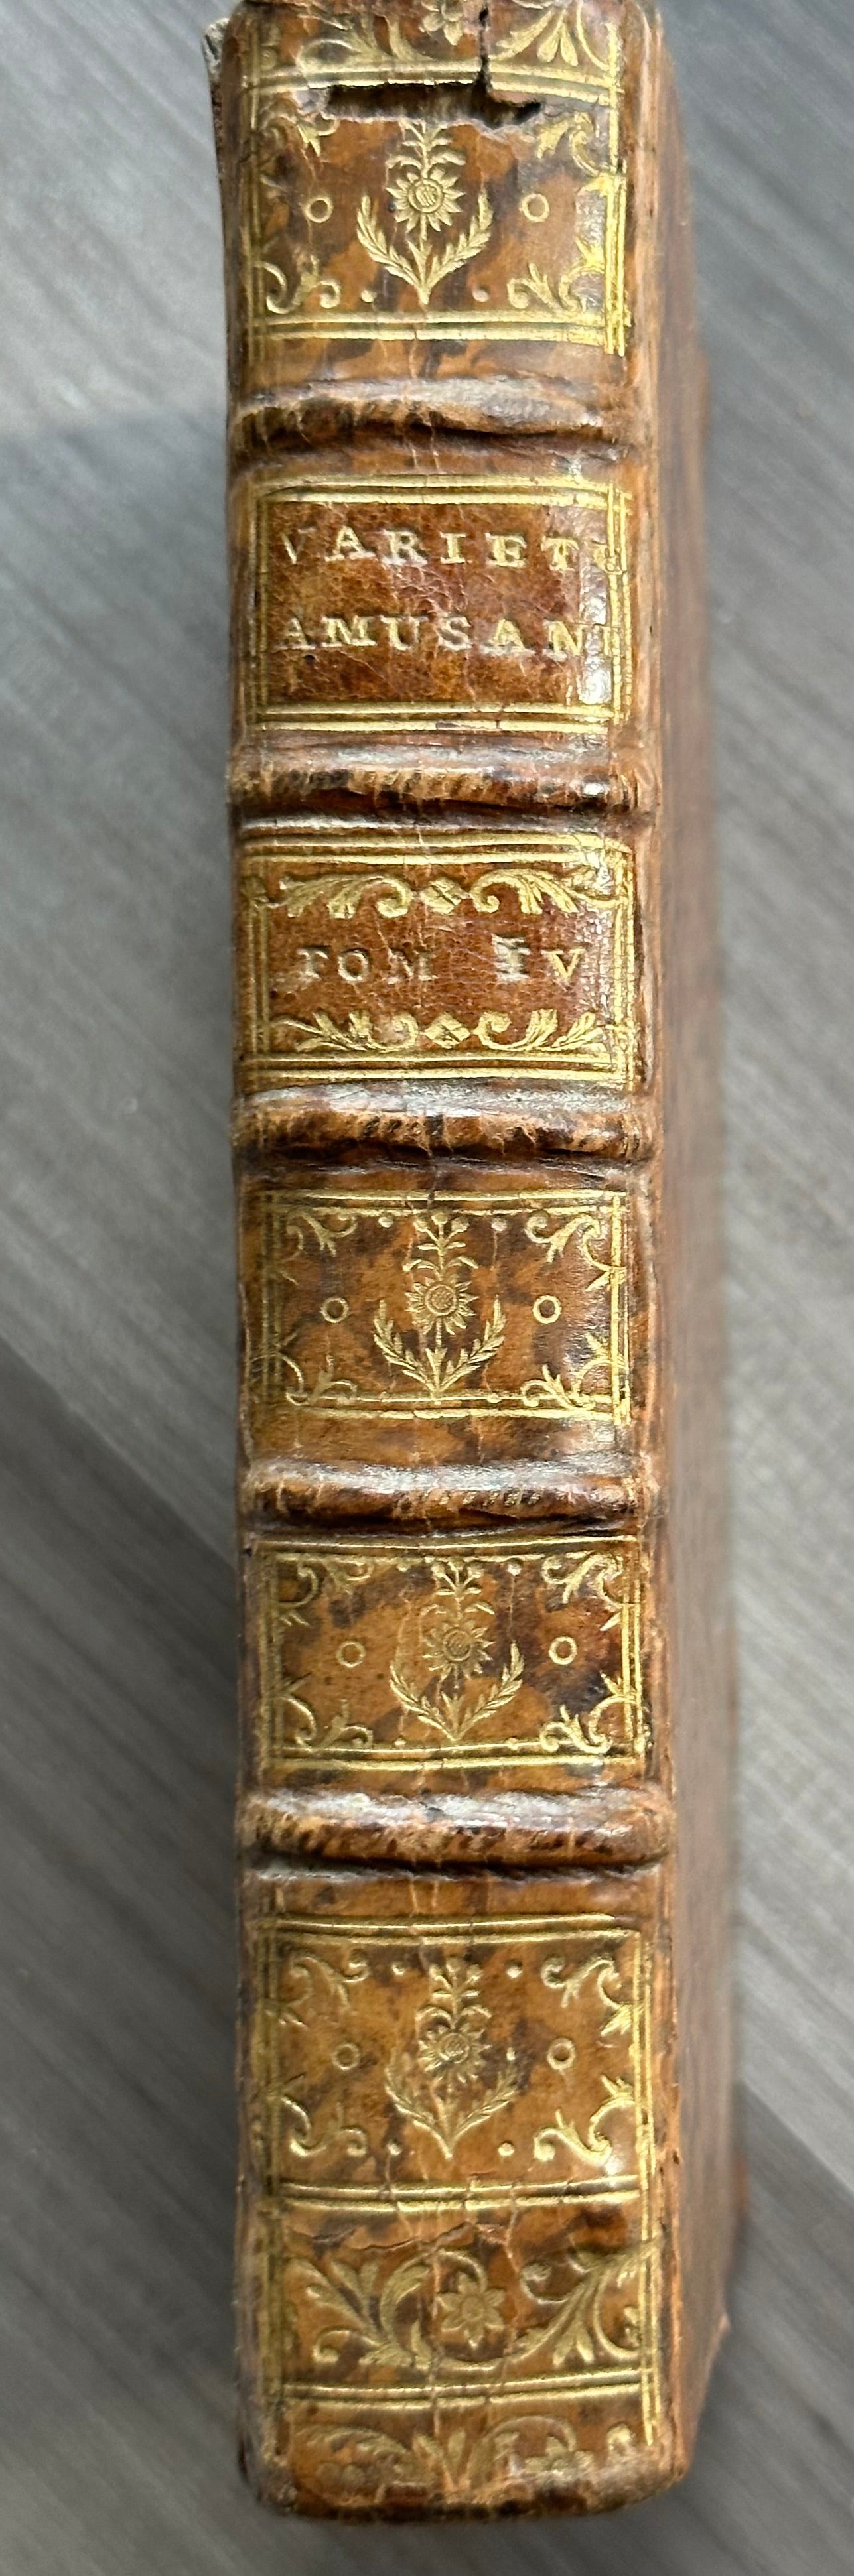 1769 French Variety Book